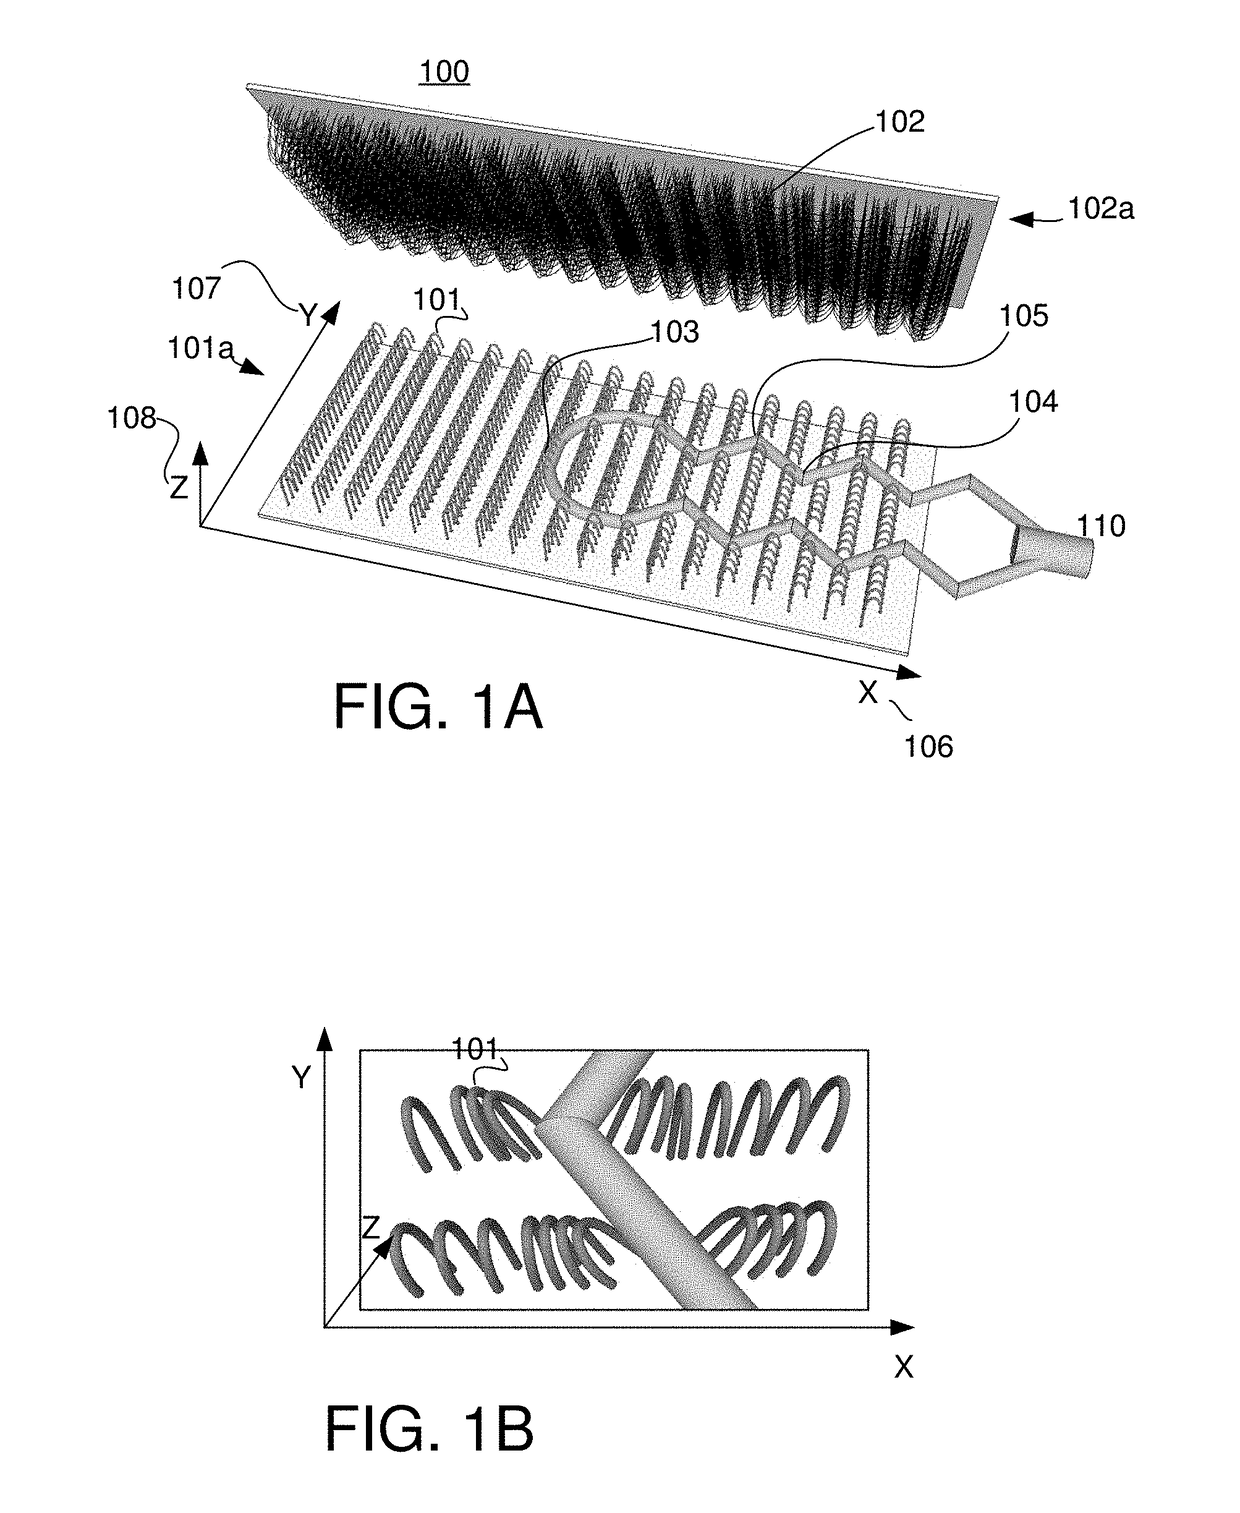 Apparatus and method of embedding articles within reclosable fastener systems